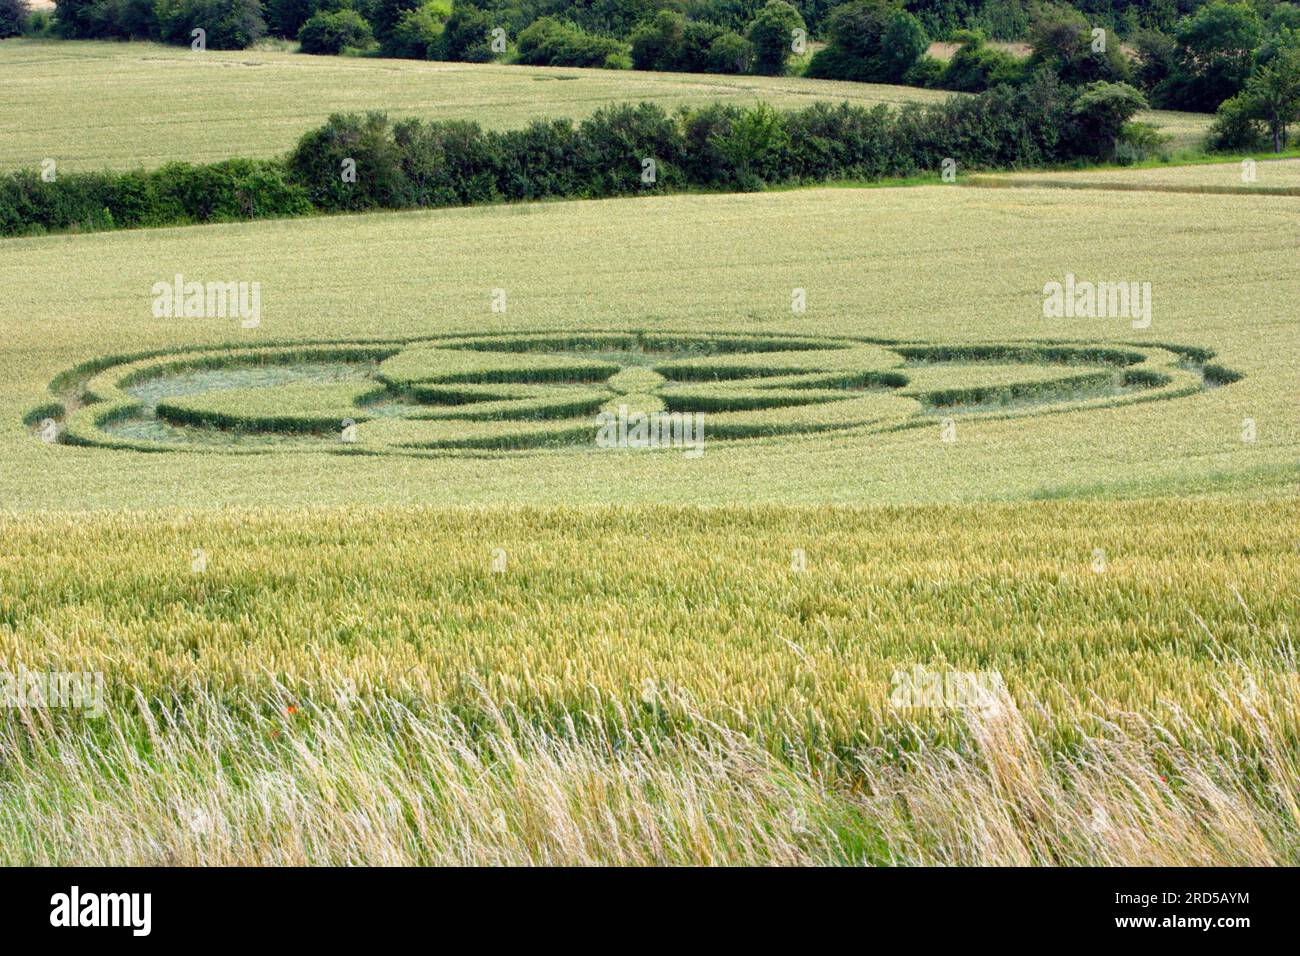 Crop circles in wheat field, Lower Saxony, Germany Stock Photo